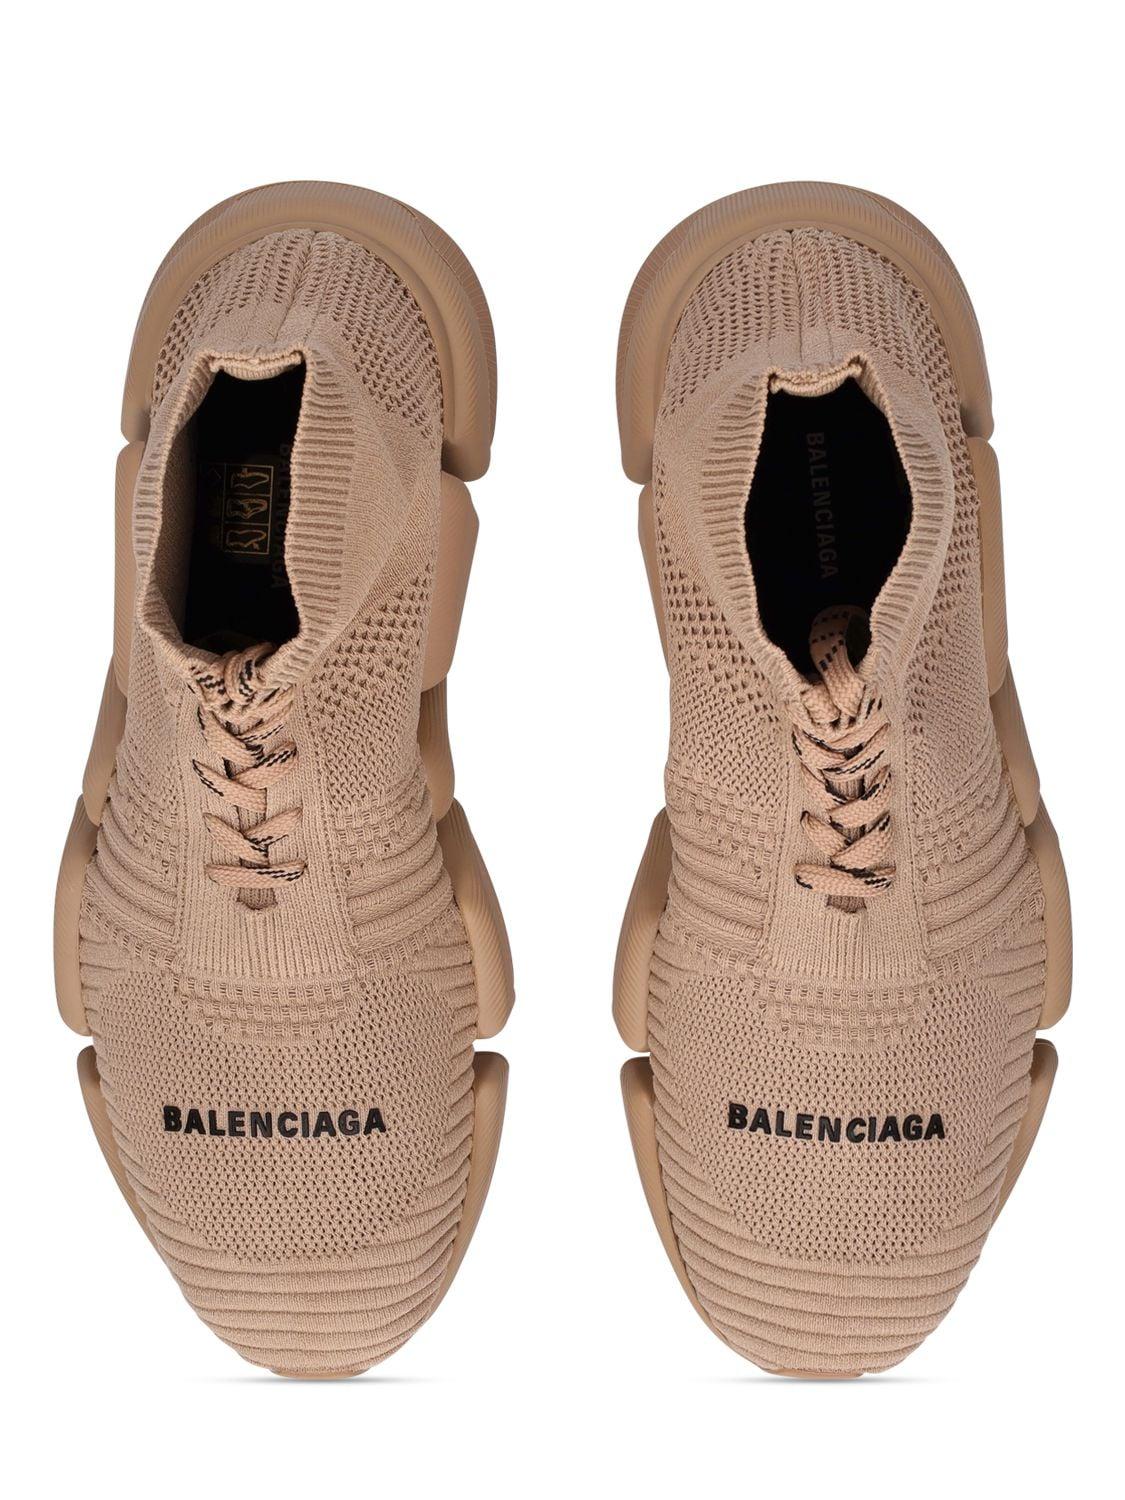 Balenciaga 30mm Speed 2 Knit Sneakers in Natural | Lyst